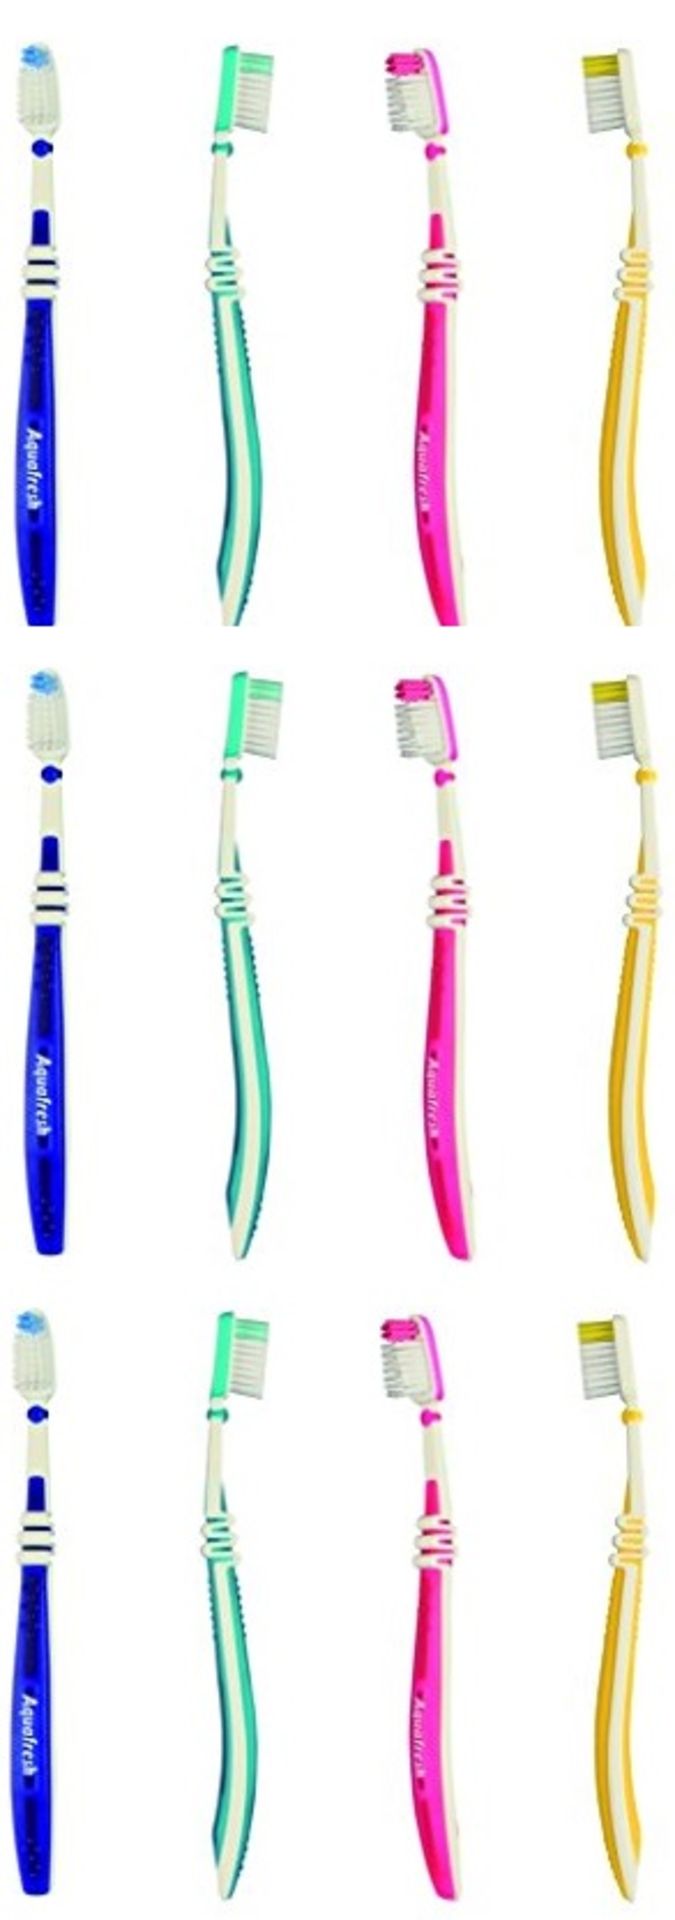 V Brand New 12 x Aquafresh Activate Triple Protection Toothbrush Firm Clean - Image 3 of 6